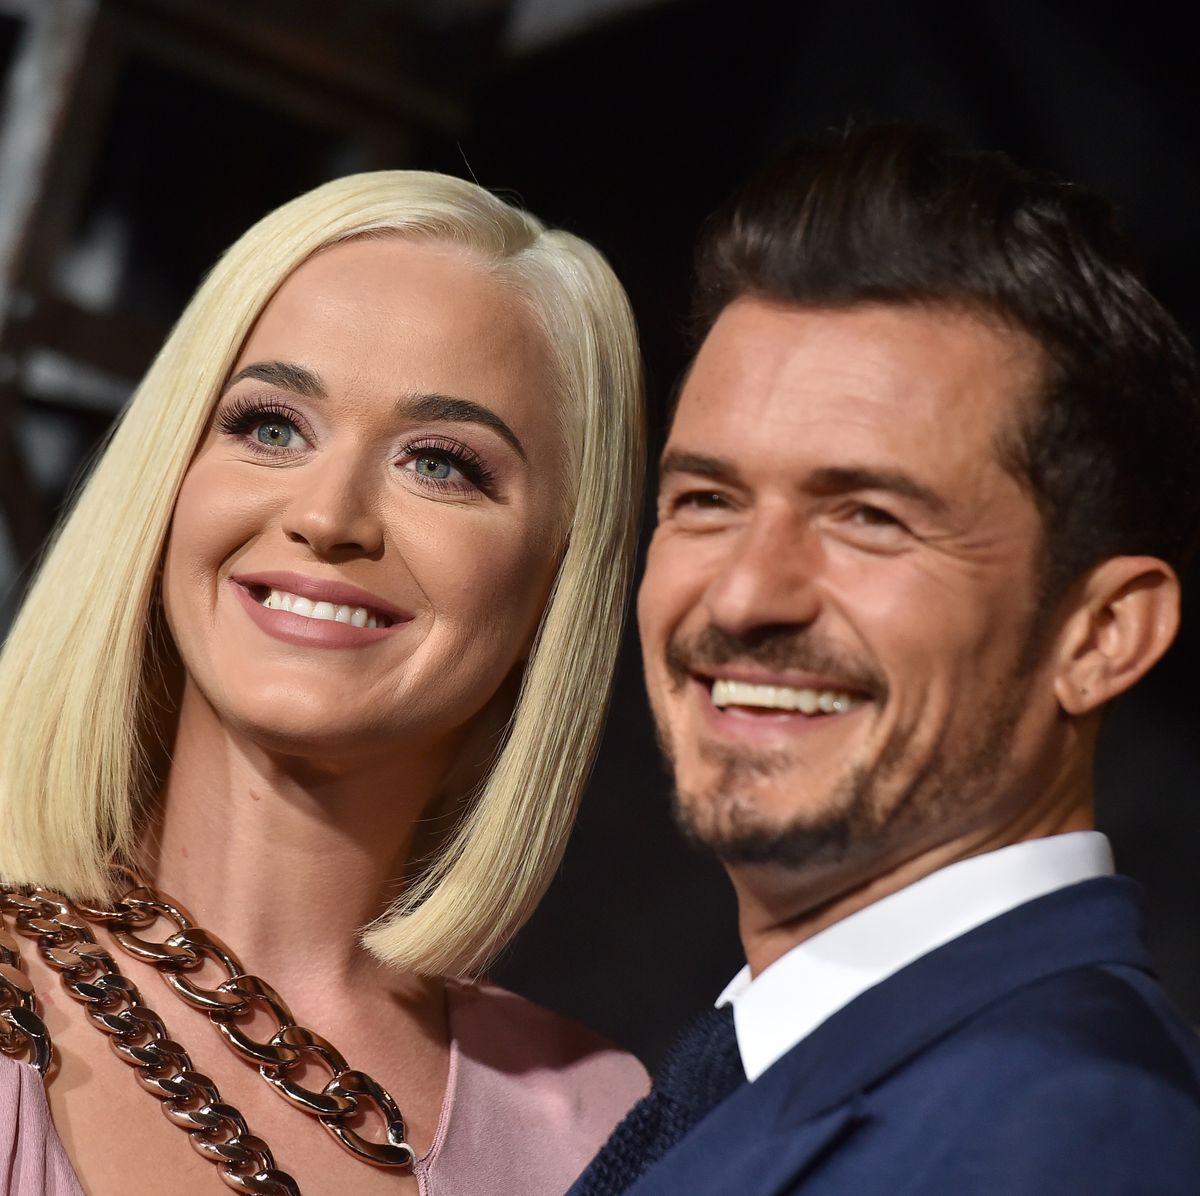 Katy Perry Just Scored a Major Win in Her Years-Long Legal Battle